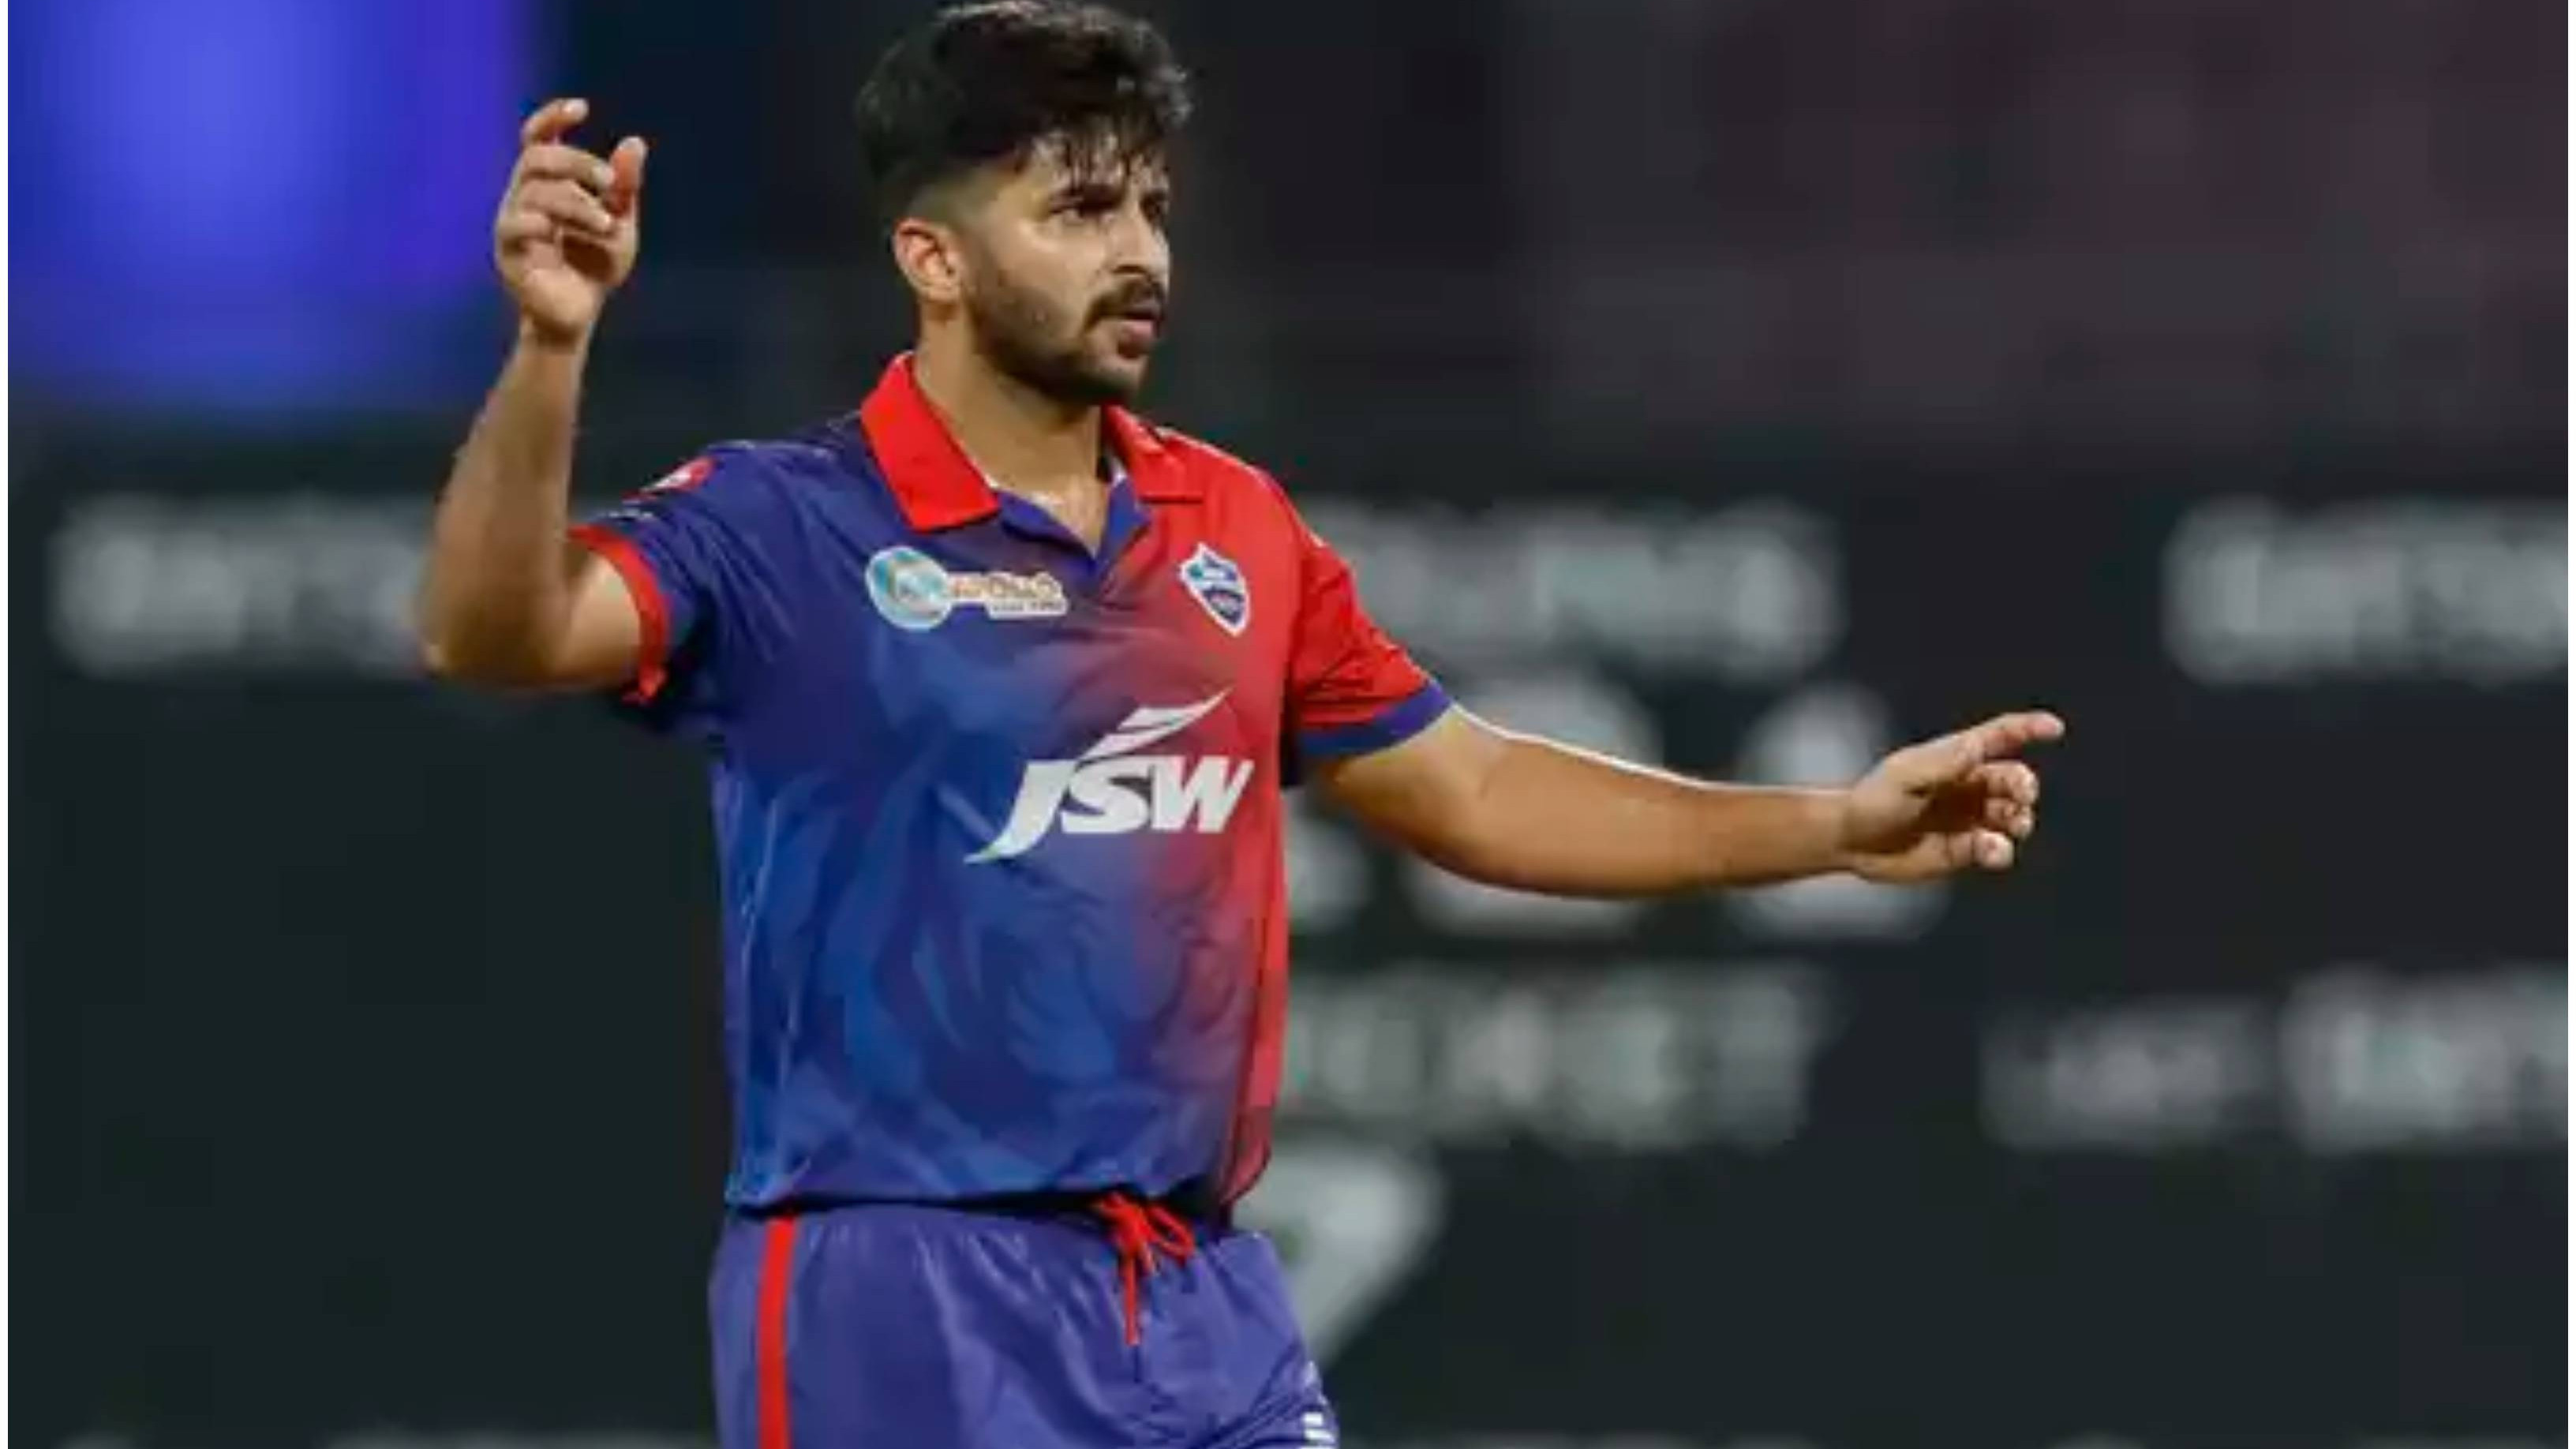 Shardul Thakur among four others likely to be released by Delhi Capitals ahead of IPL 2023 auction: Report